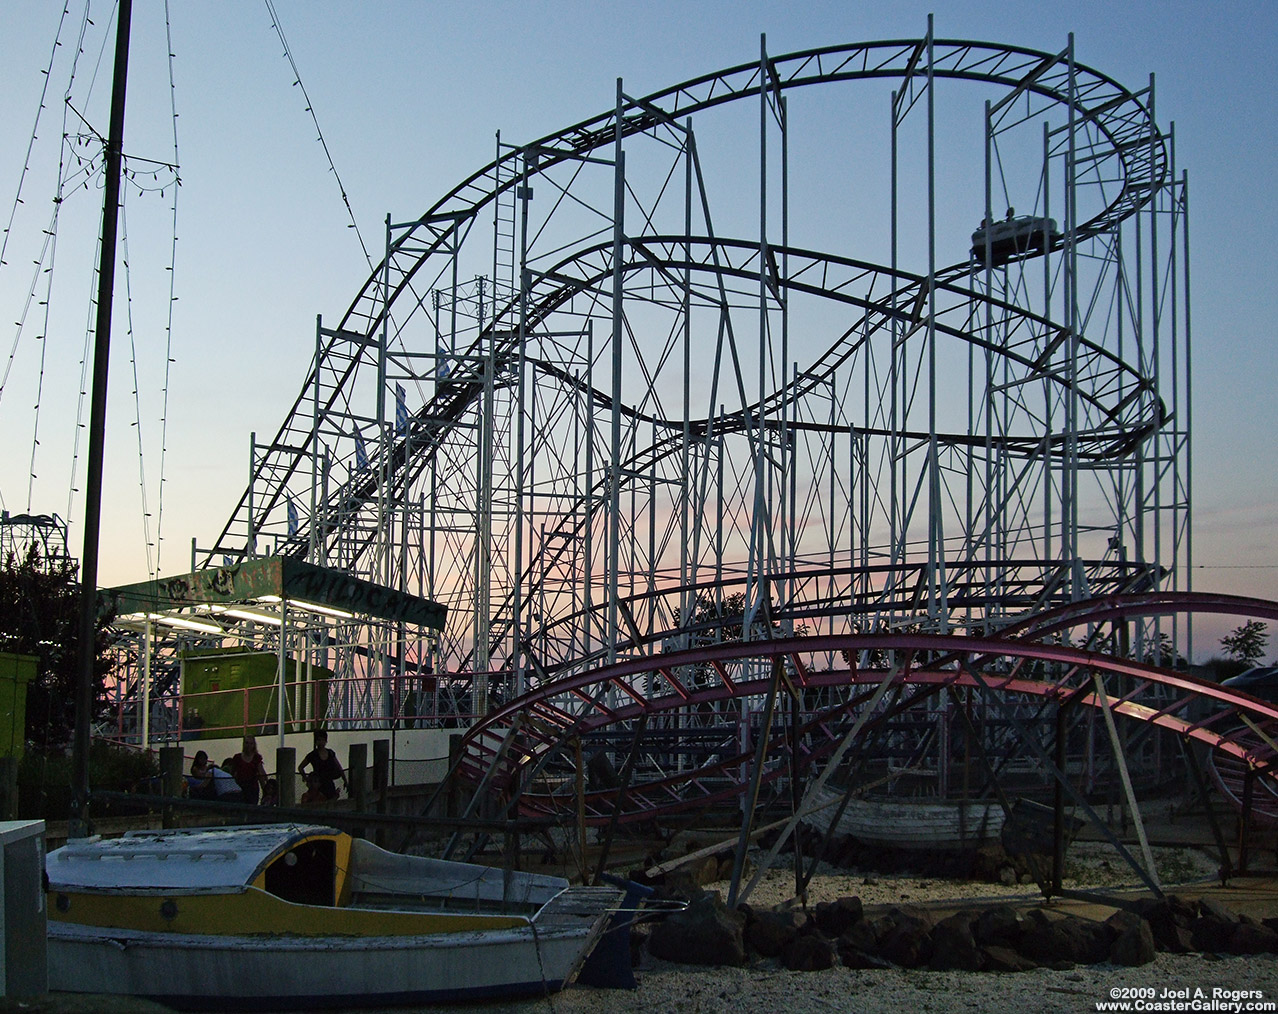 Roller coasters at sunset